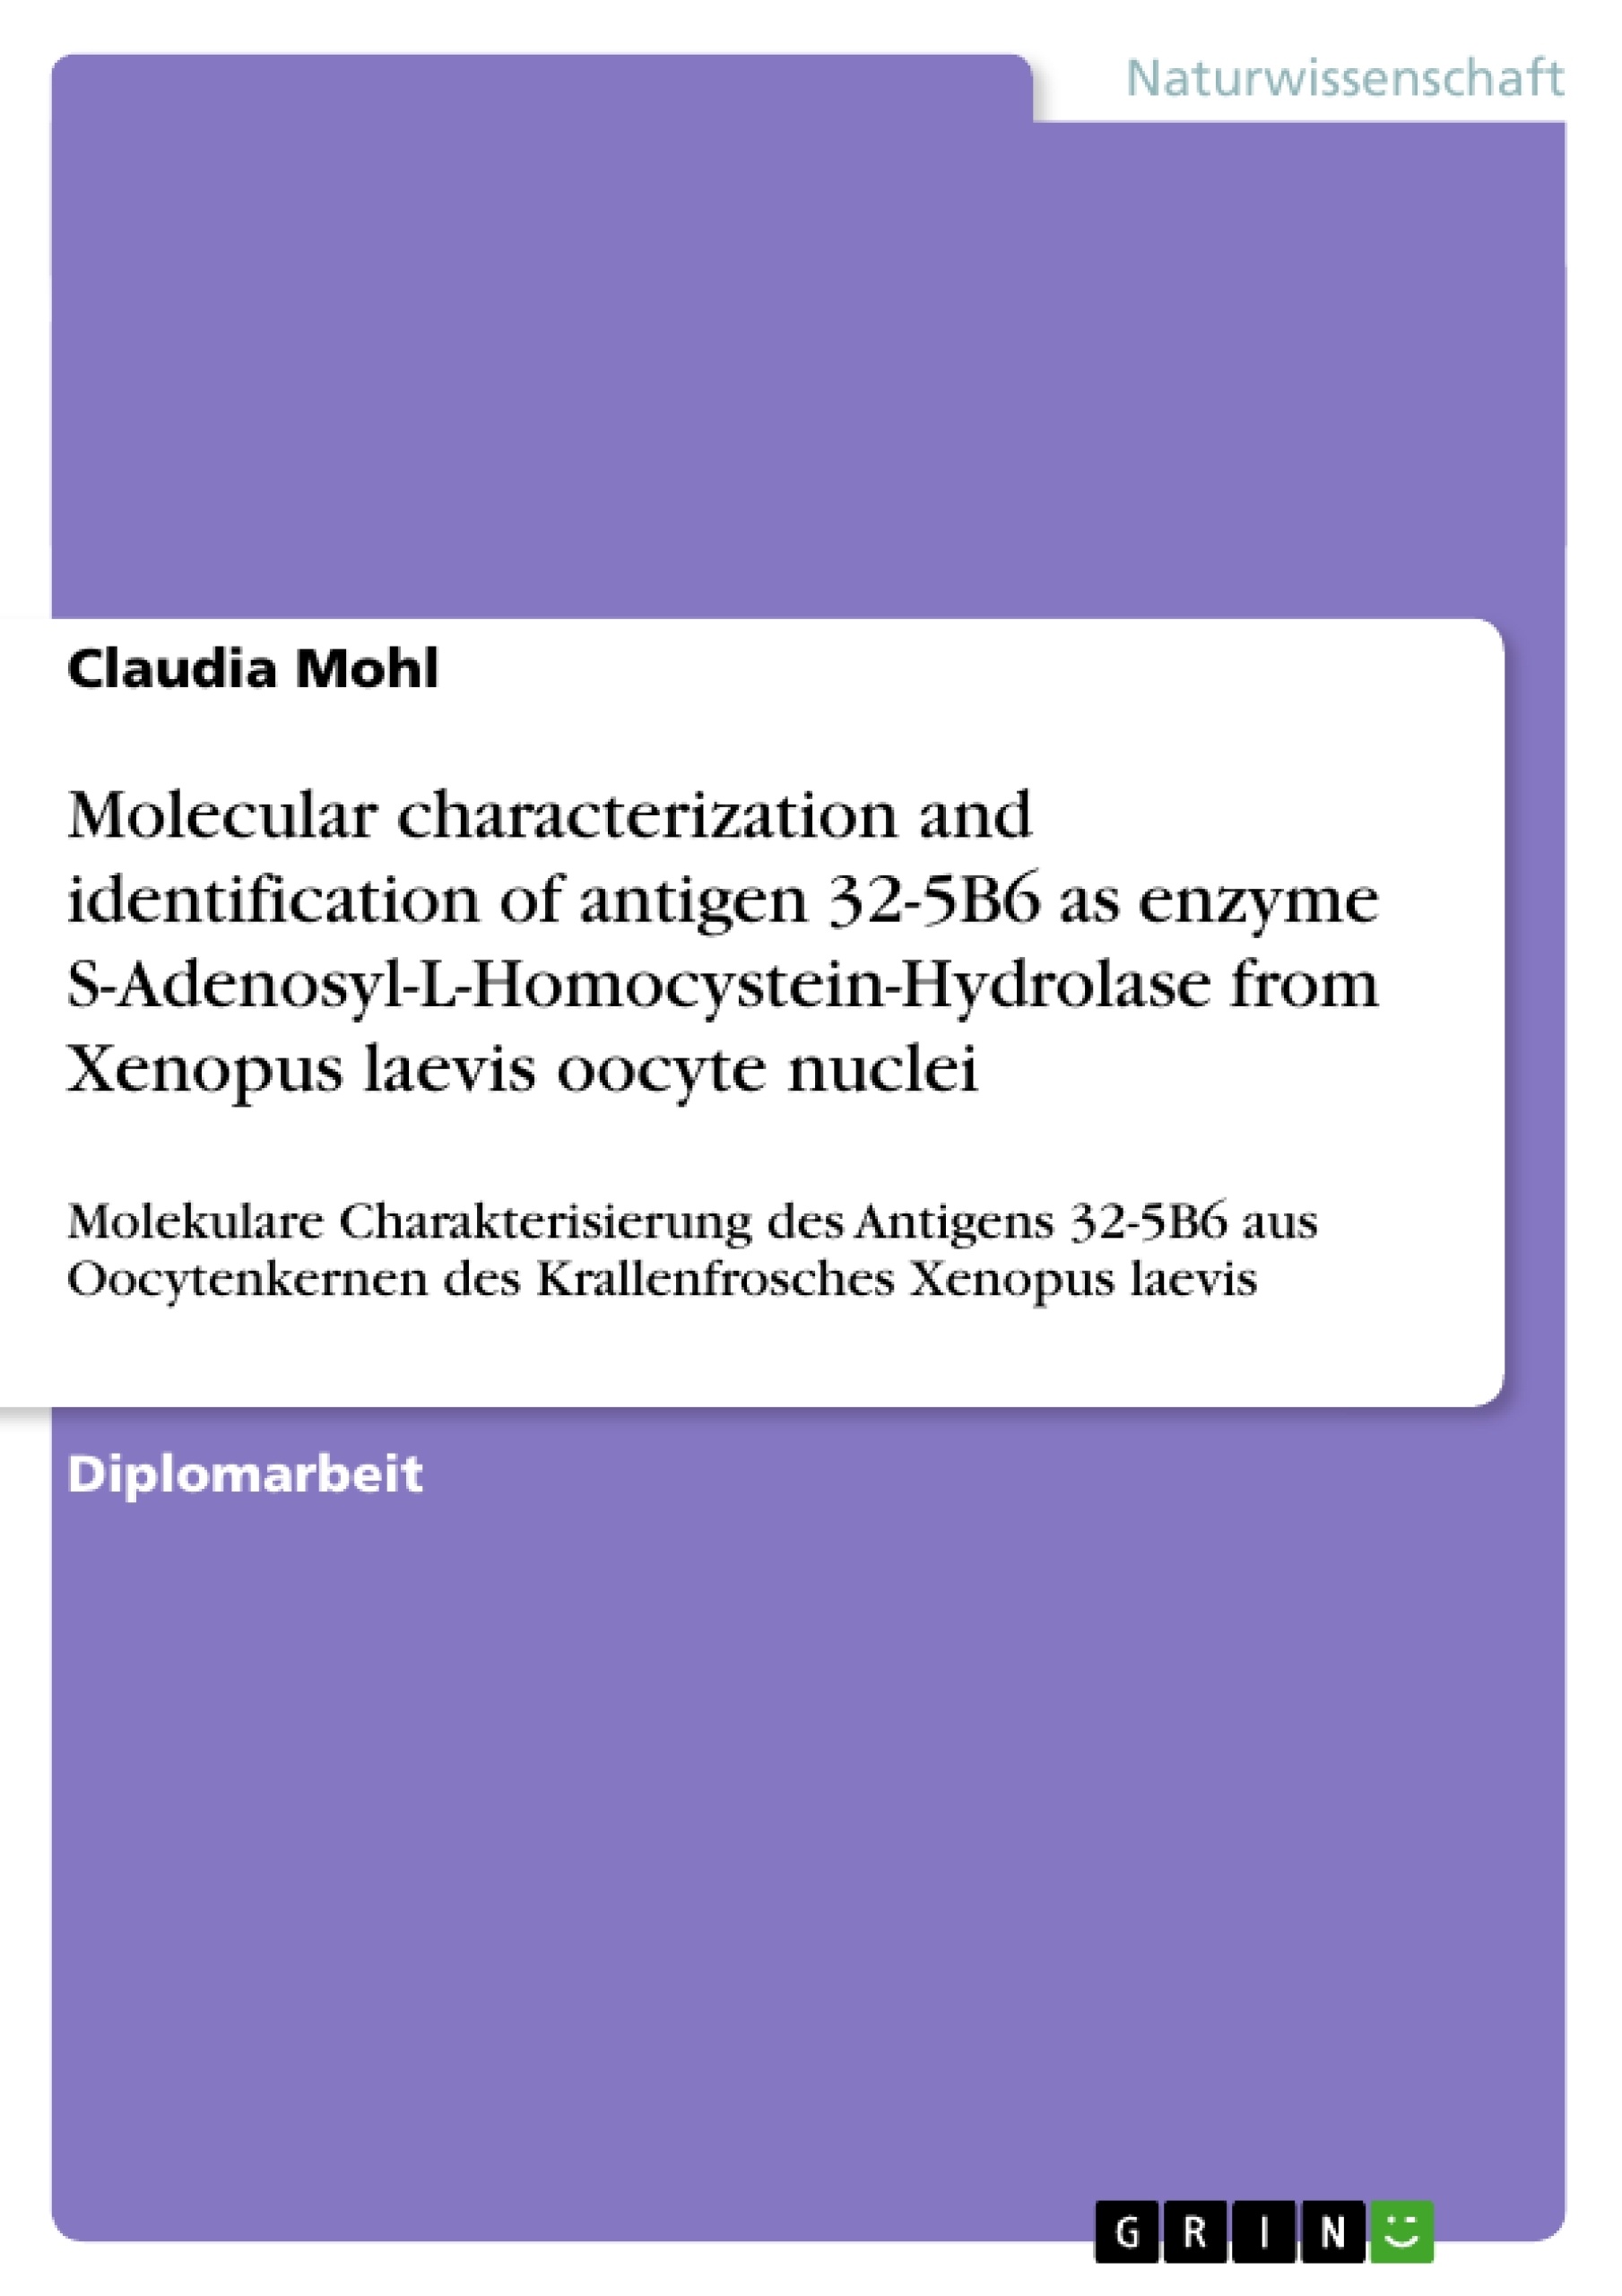 Titel: Molecular characterization and identification of antigen 32-5B6 as enzyme S-Adenosyl-L-Homocystein-Hydrolase from Xenopus laevis oocyte nuclei 